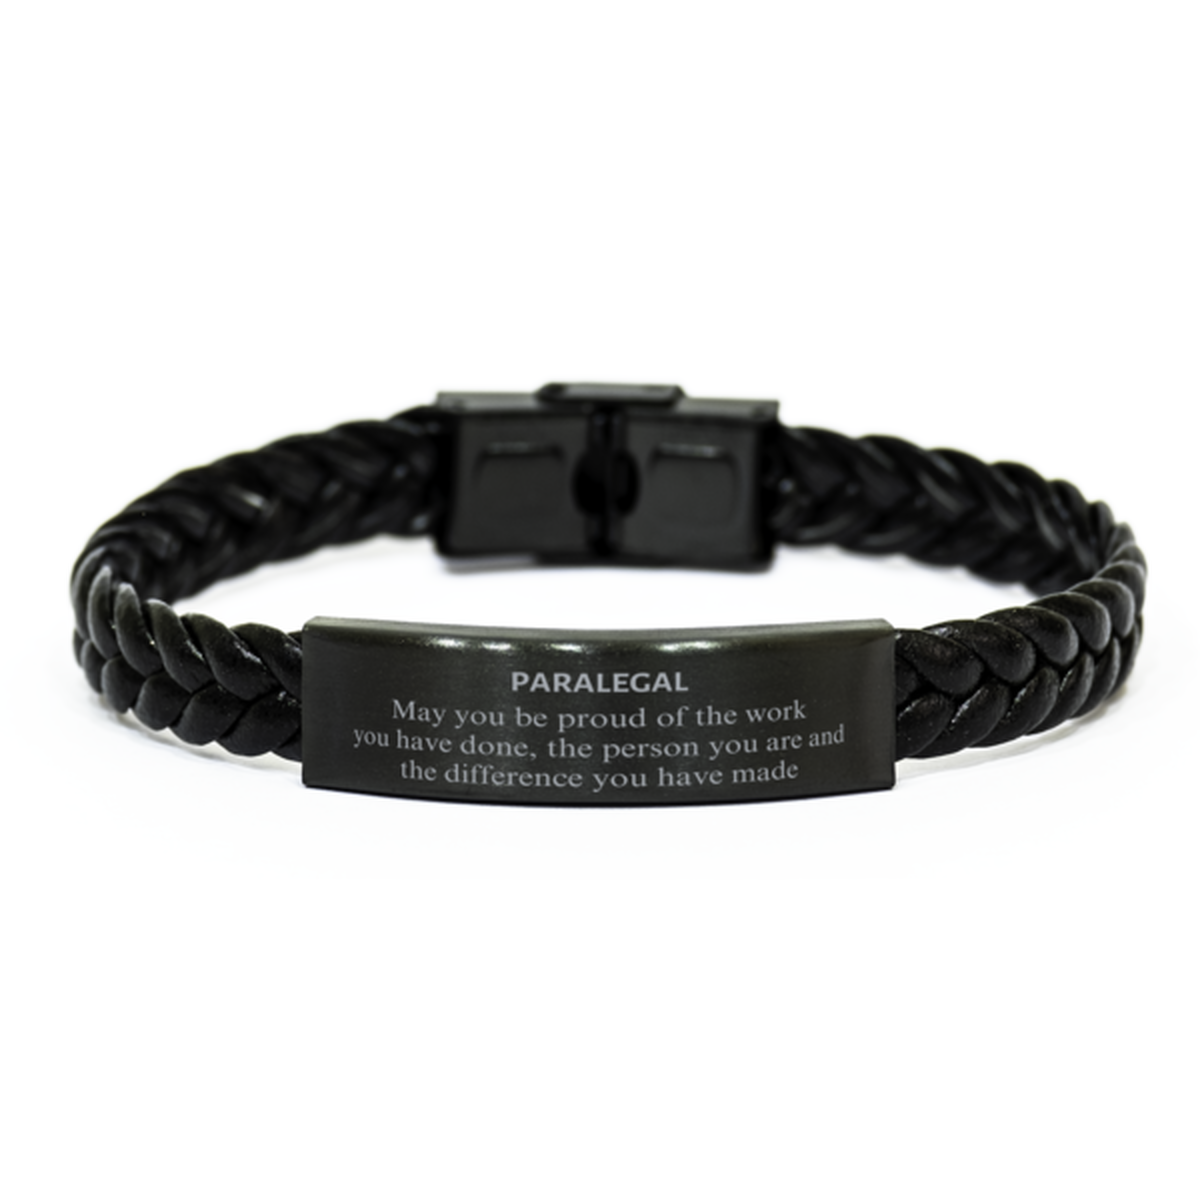 Paralegal May you be proud of the work you have done, Retirement Paralegal Braided Leather Bracelet for Colleague Appreciation Gifts Amazing for Paralegal